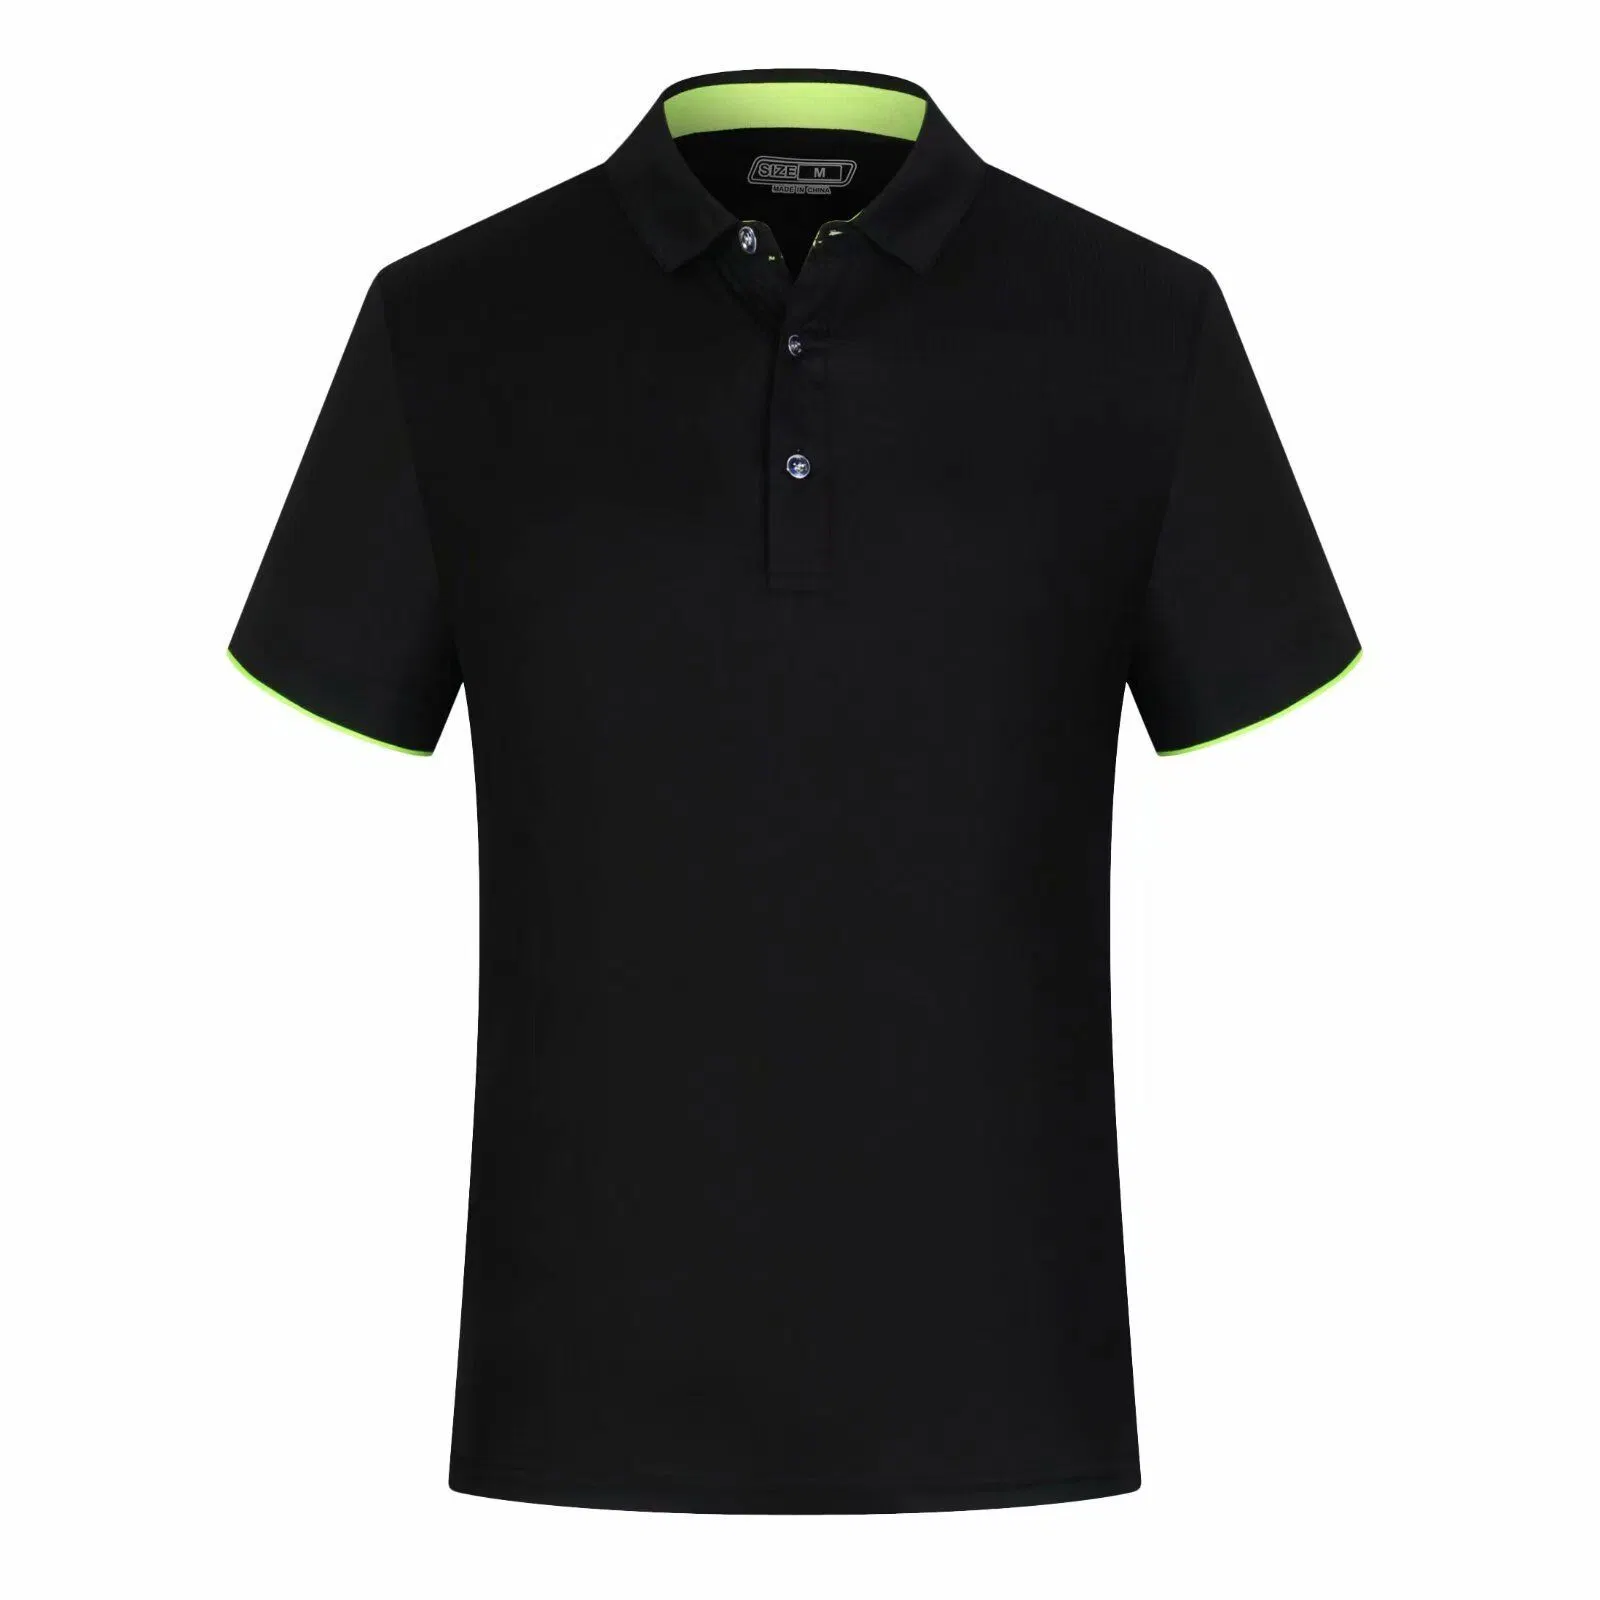 Mens Printing Customized Polo T Shirt Factory Polyester Dri Fit Polo Shirt Golf Shirt Polyester Polo Shirts for Men